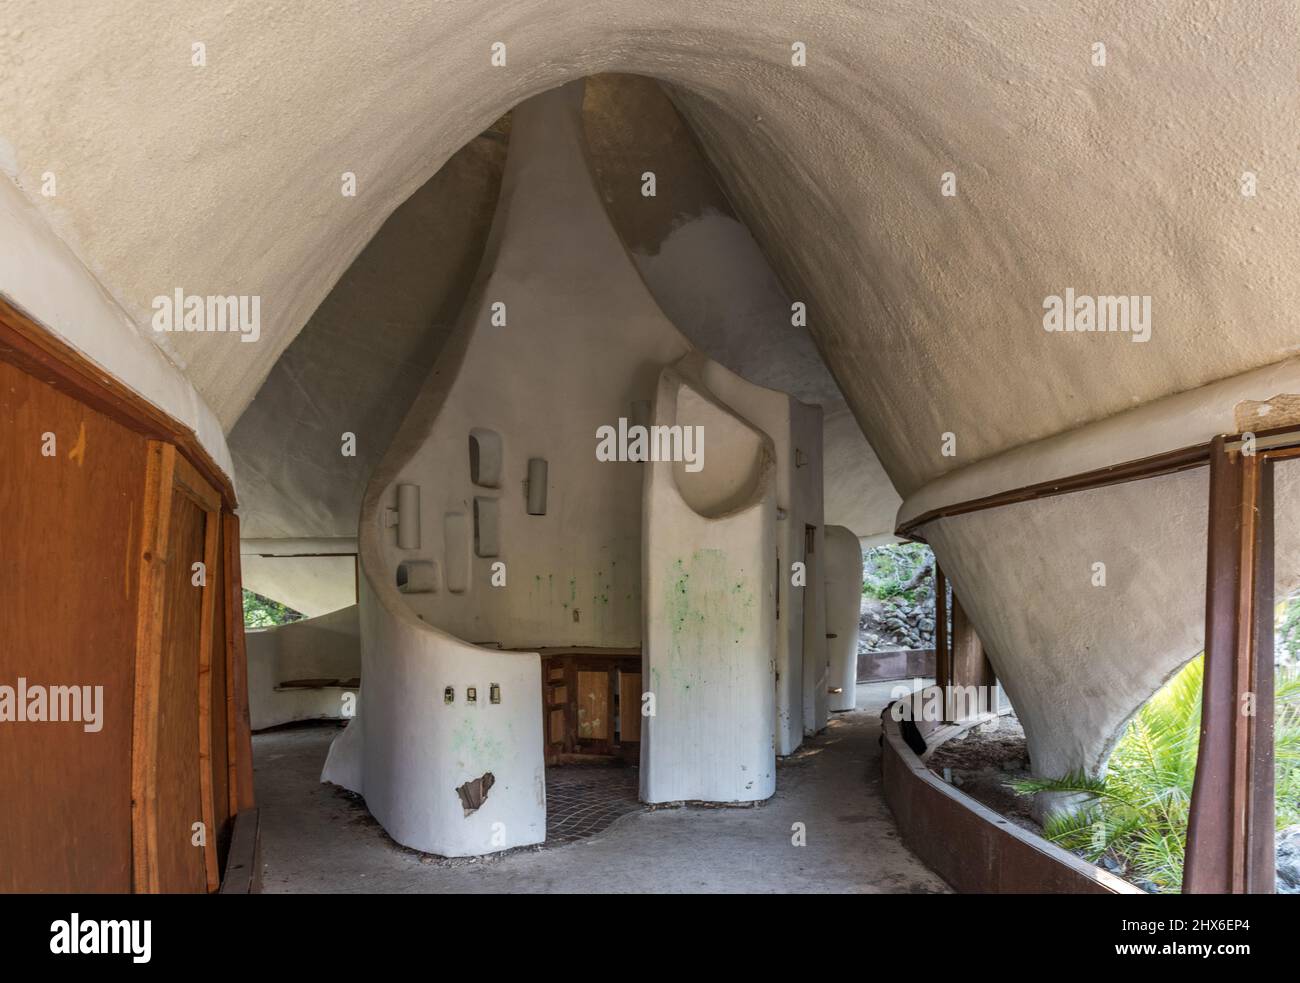 San Luis Obispo, CA /USA - April 2, 2016: Interior view of Shell House at Cal Poly Architecture. Graveyard. Stock Photo